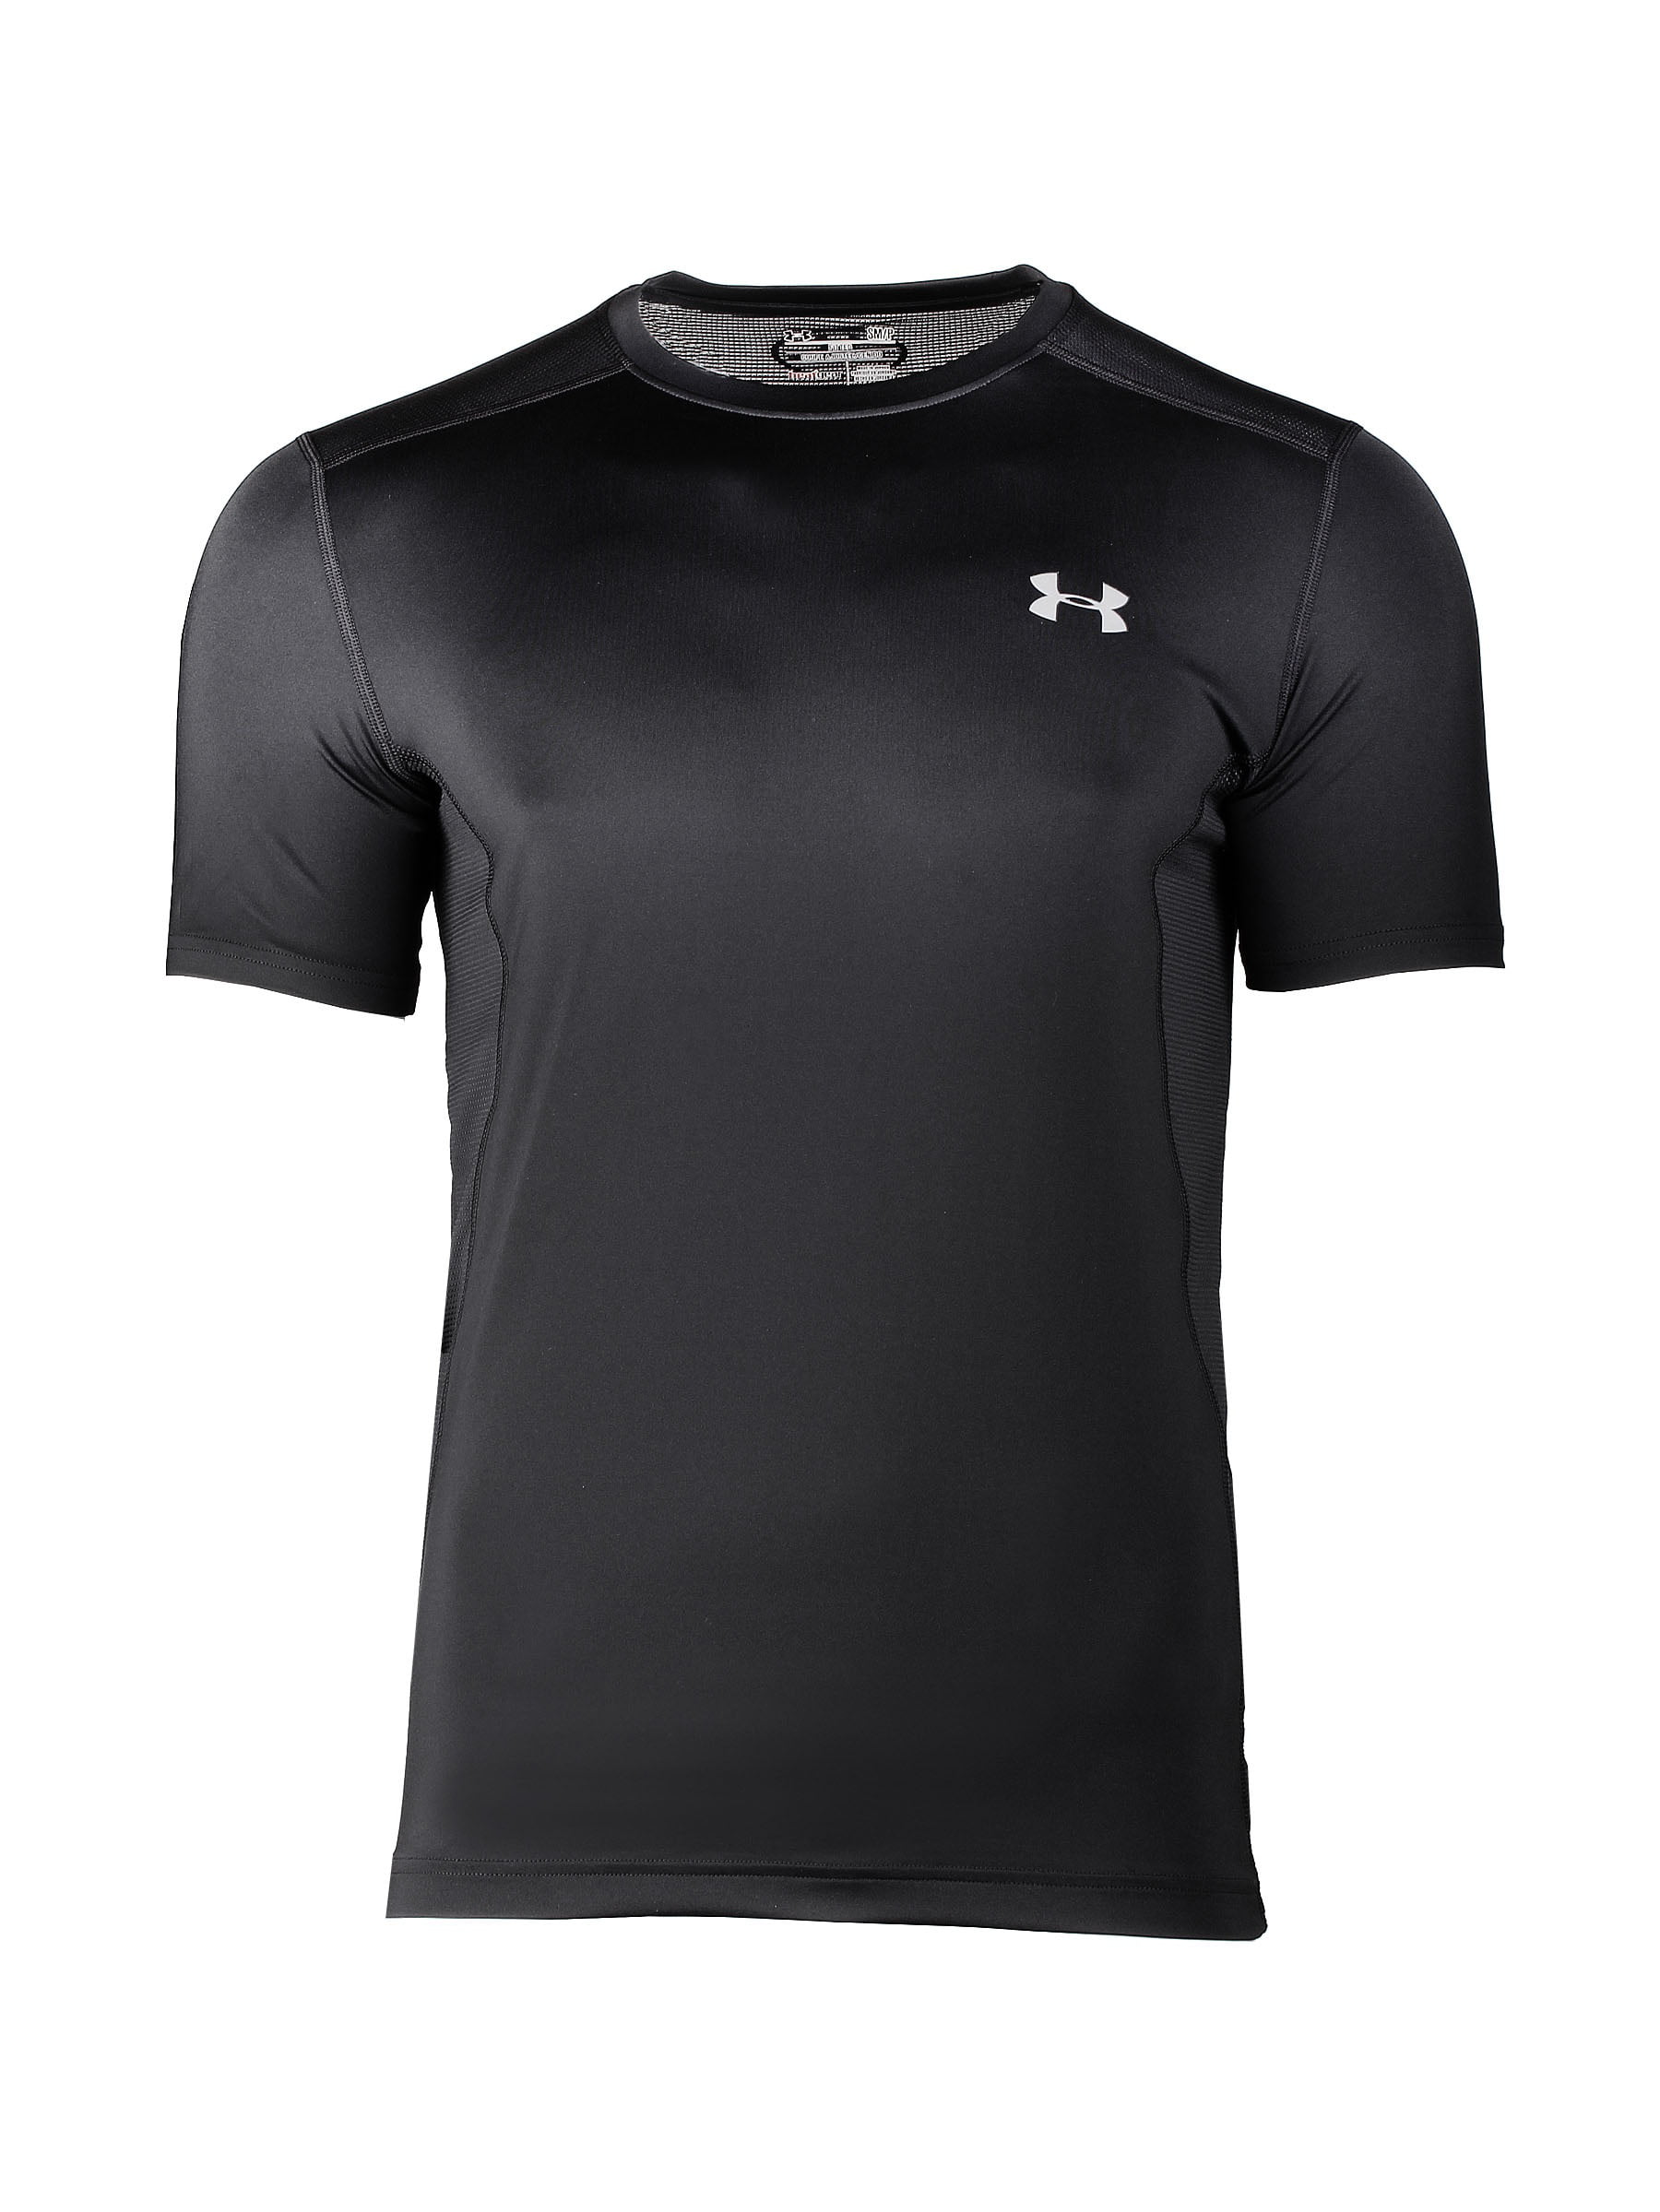 men's under armour fitted t shirts